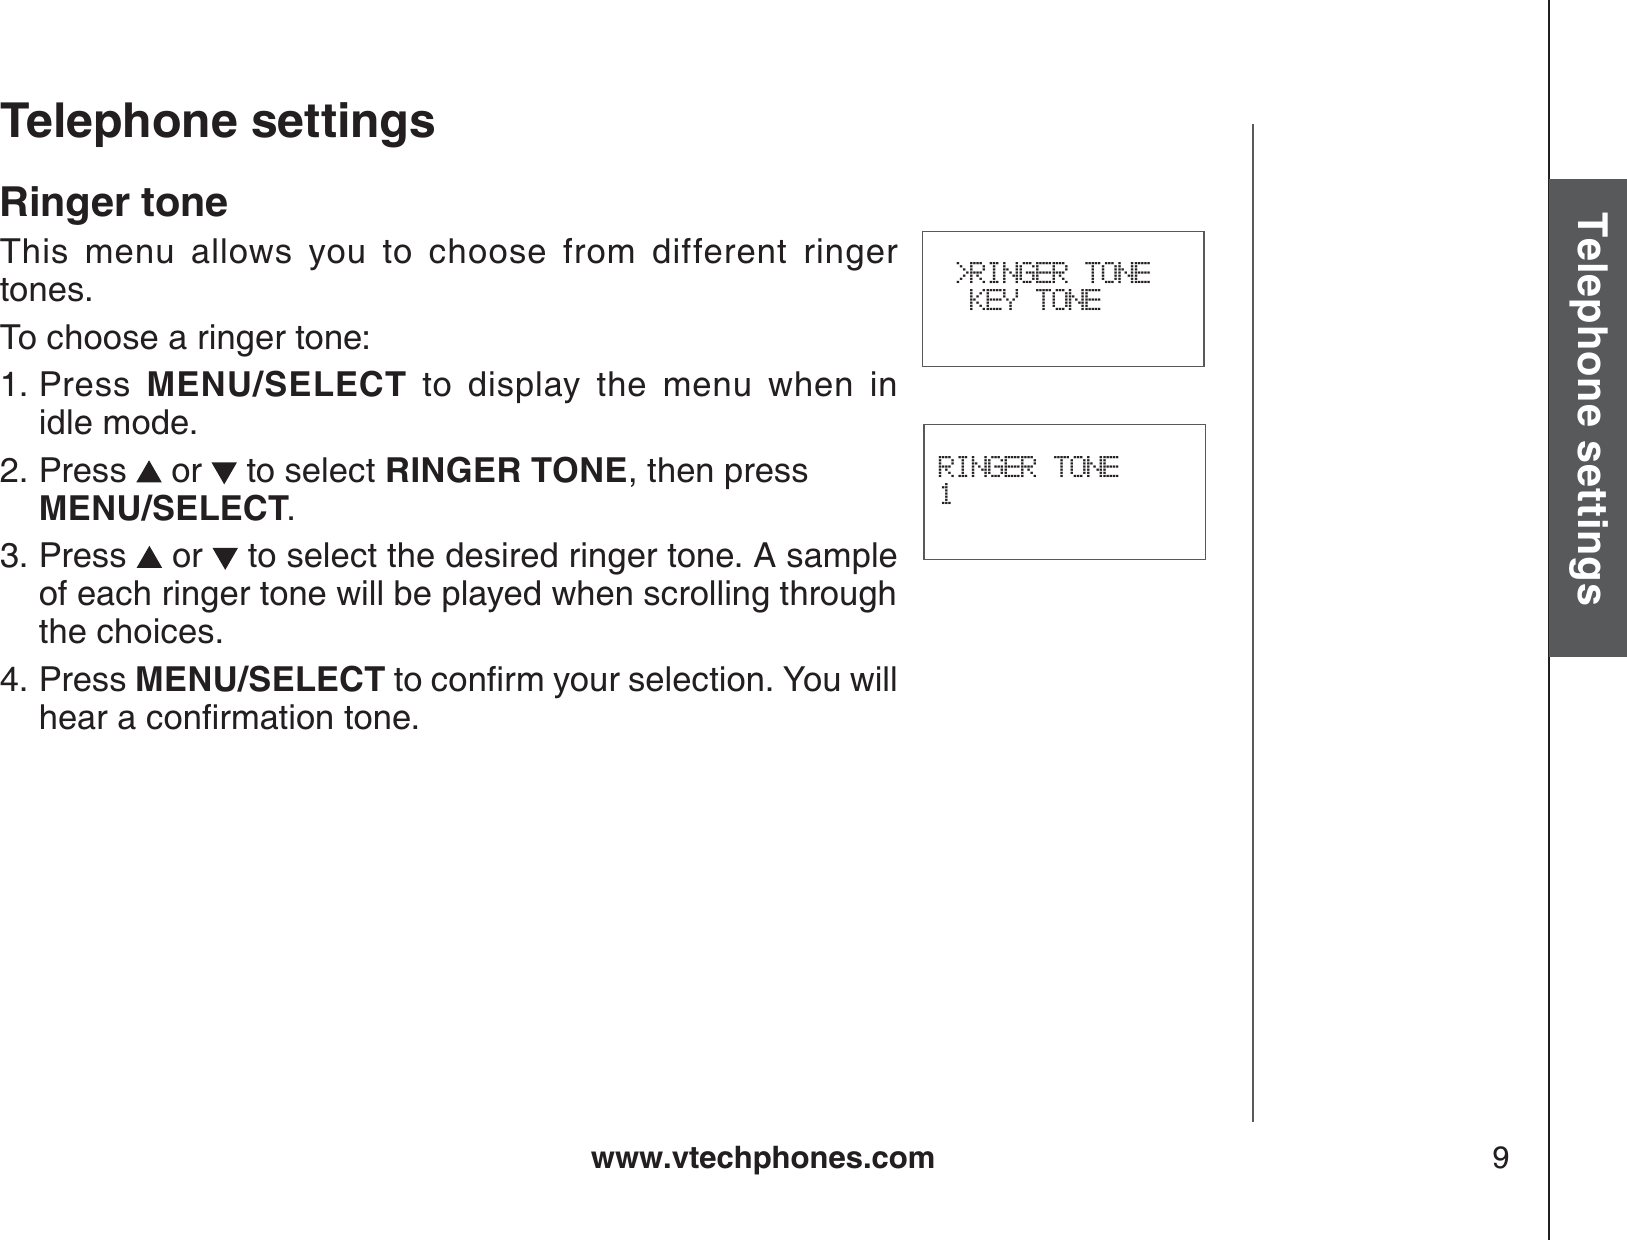 www.vtechphones.com 9Basic operationTelephone settingsTelephone settingsRINGER TONE1 &gt;RINGER TONE  KEY TONERinger toneThis menu allows you to choose from different ringer tones.To choose a ringer tone:Press MENU/SELECT to display the menu when in          idle mode.Press  or   to select RINGER TONE, then press MENU/SELECT.Press   or   to select the desired ringer tone. A sample of each ringer tone will be played when scrolling through the choices.Press MENU/SELECTVQEQPſTO[QWTUGNGEVKQP;QWYKNNJGCTCEQPſTOCVKQPVQPG1.2.3.4.